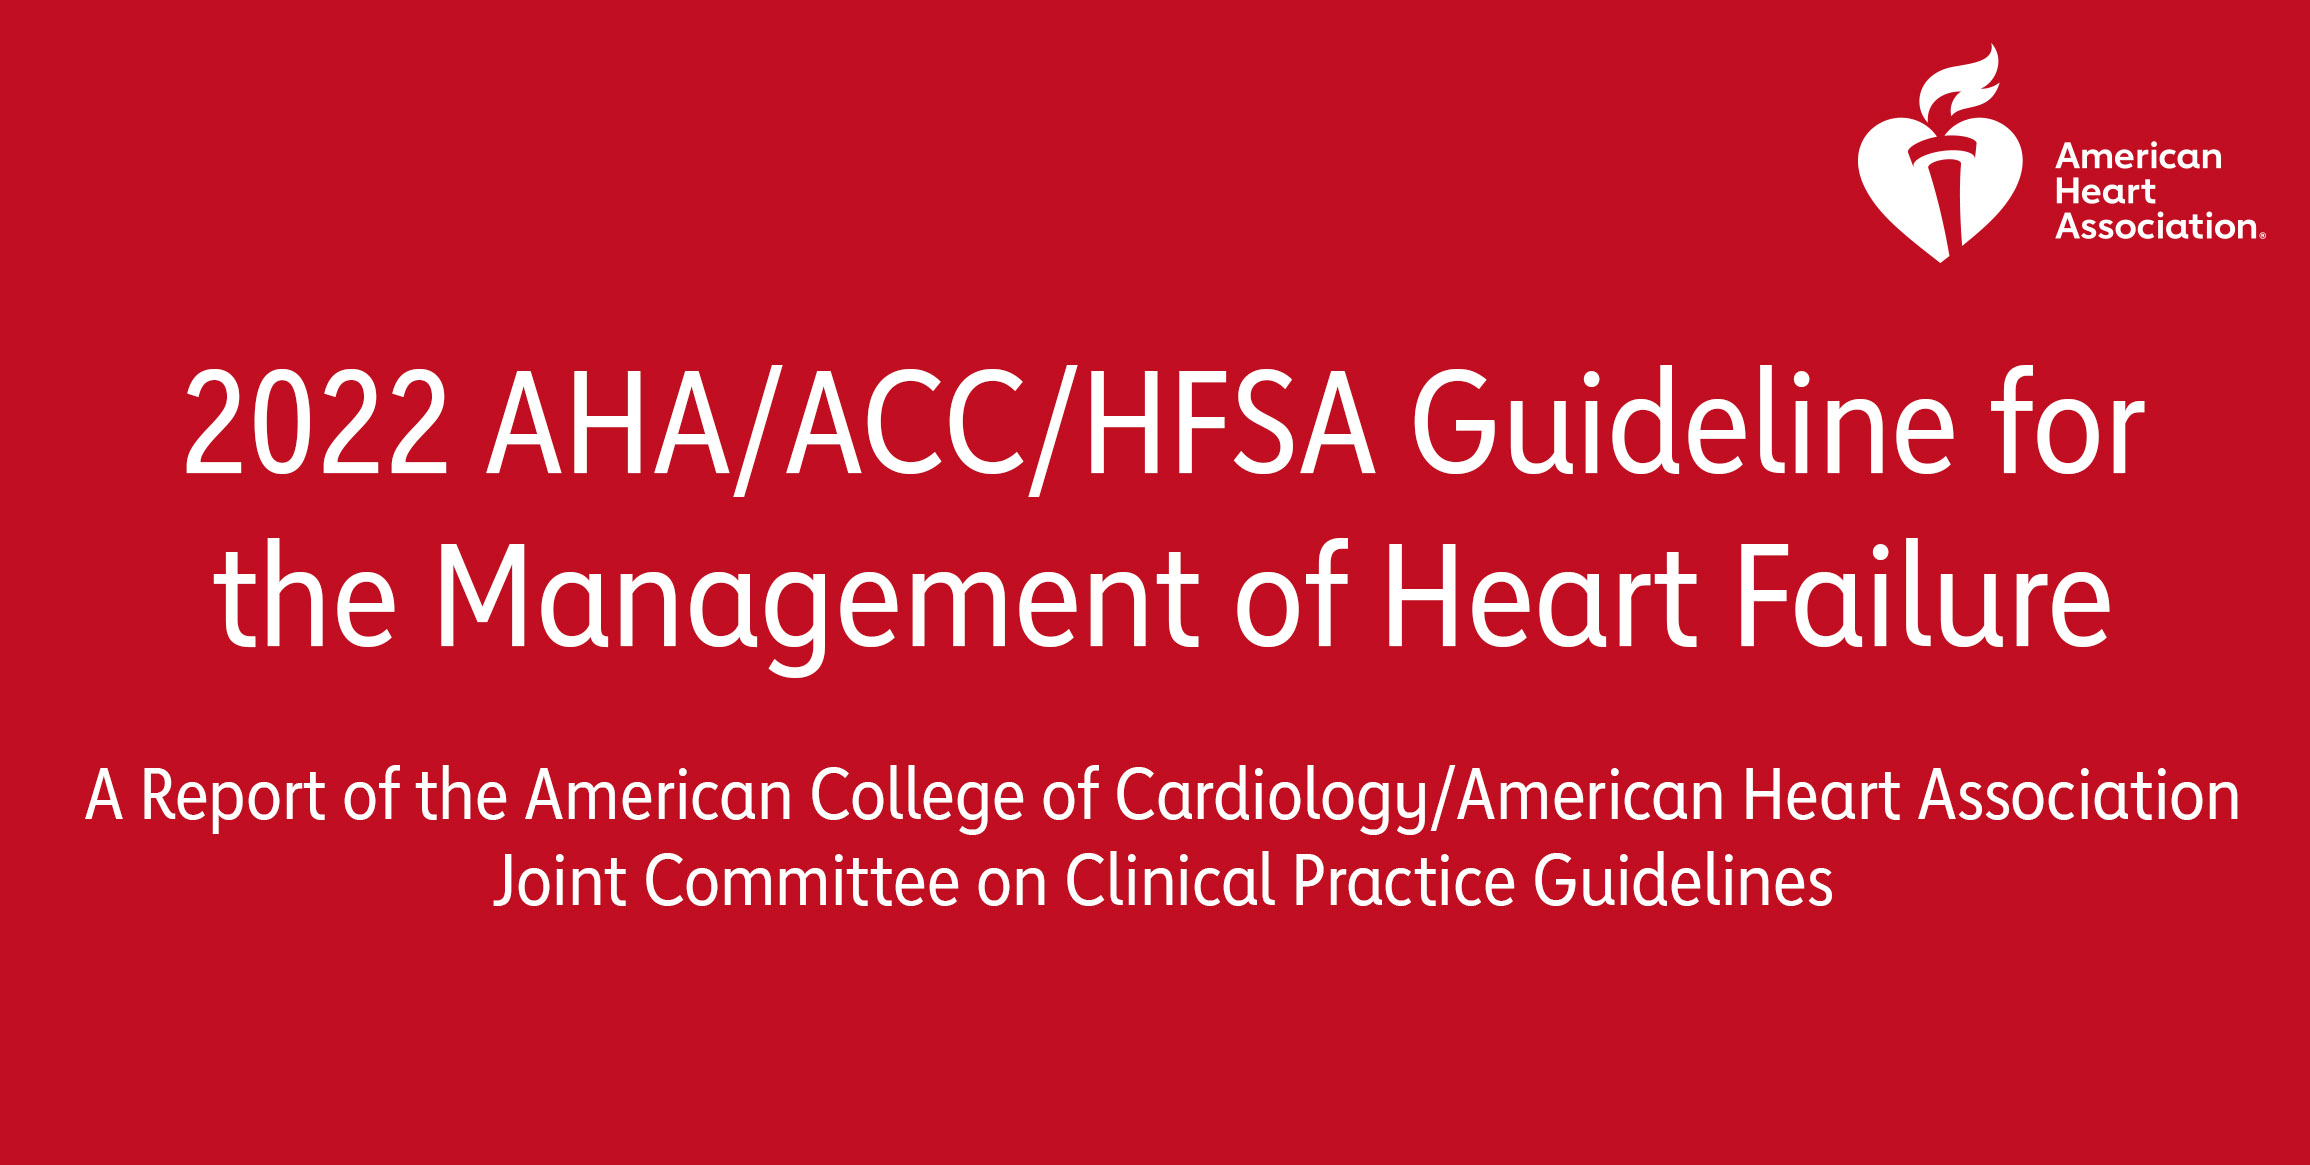 2022 AHA/ACC/HFSA Guideline for the Management of Heart Failure: A Report  of the American College of Cardiology/American Heart Association Joint  Committee on Clinical Practice Guidelines | Circulation